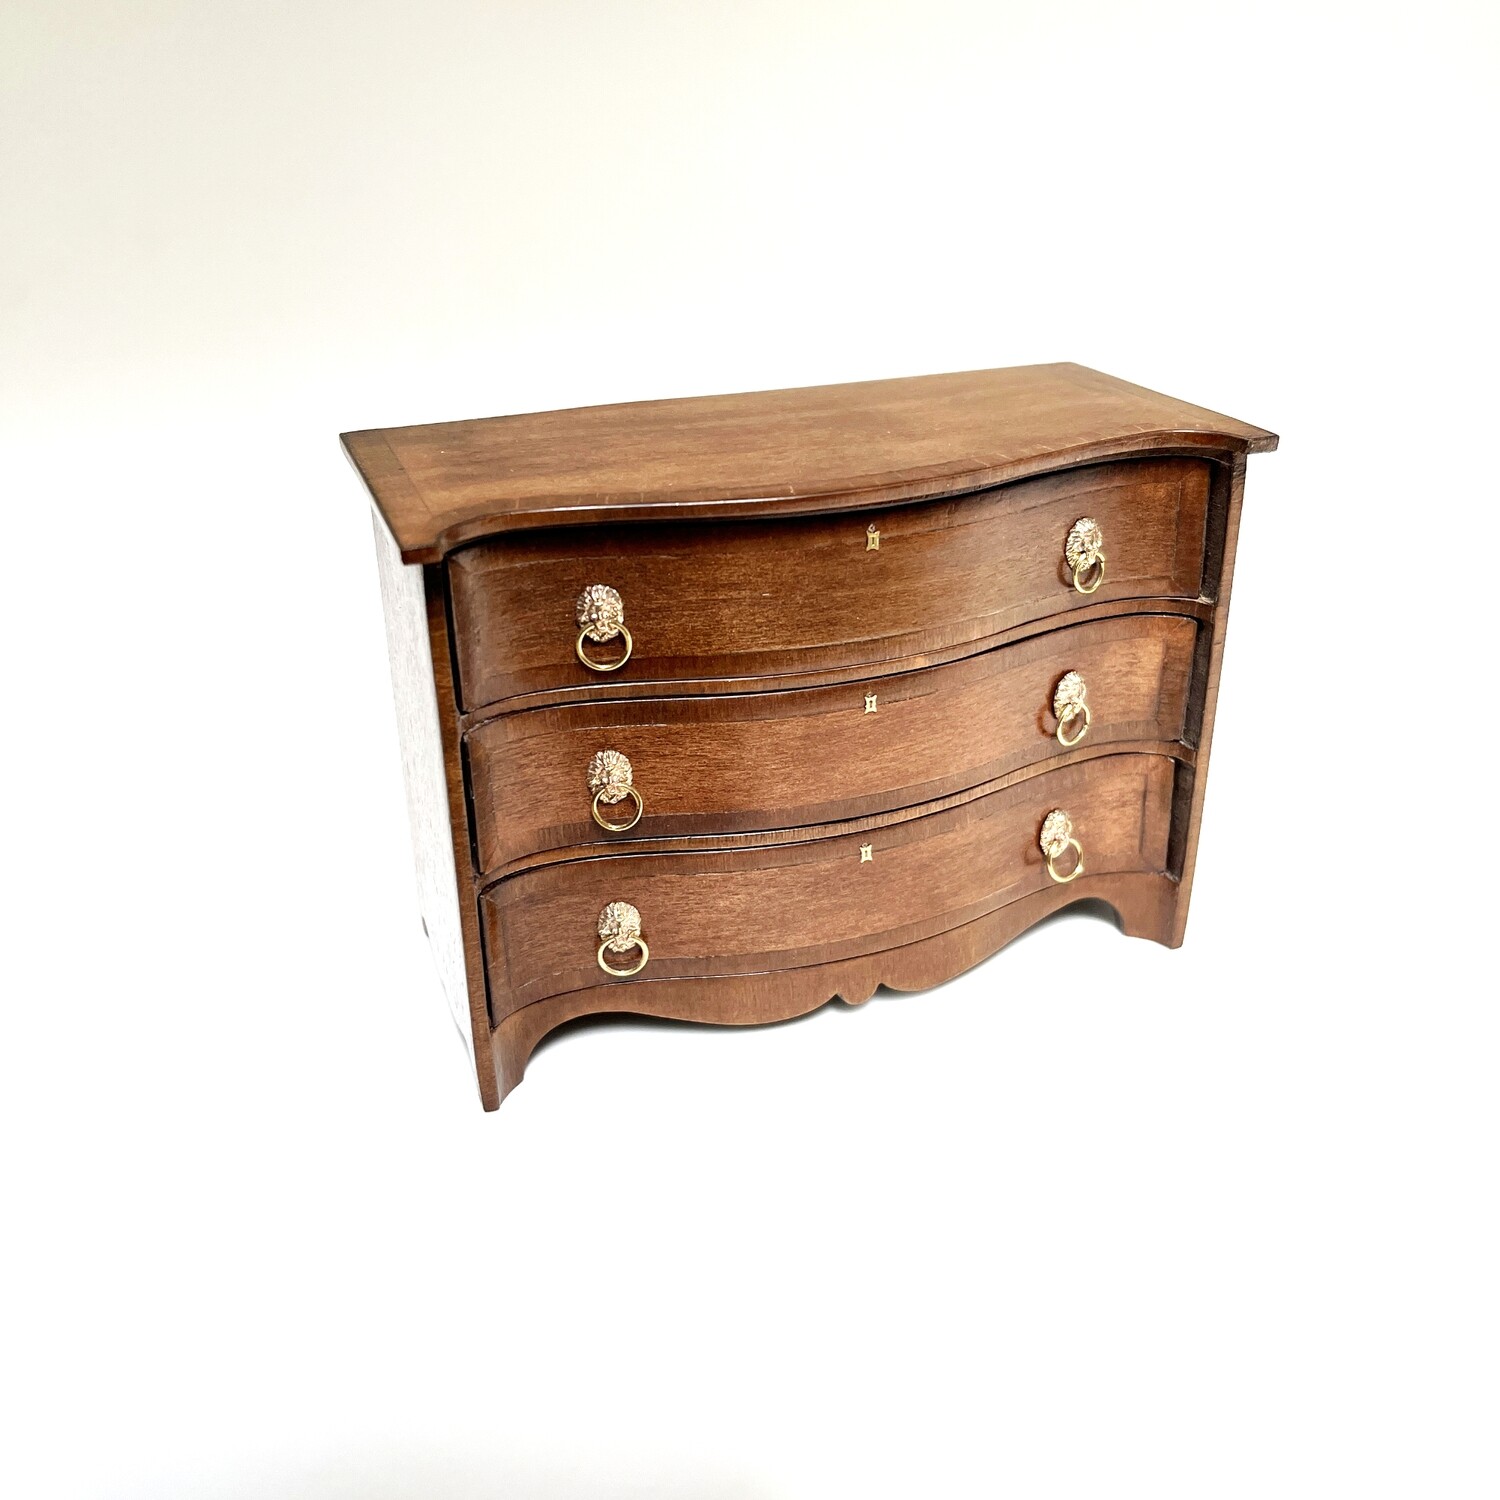 18th century serpentine chest of drawers